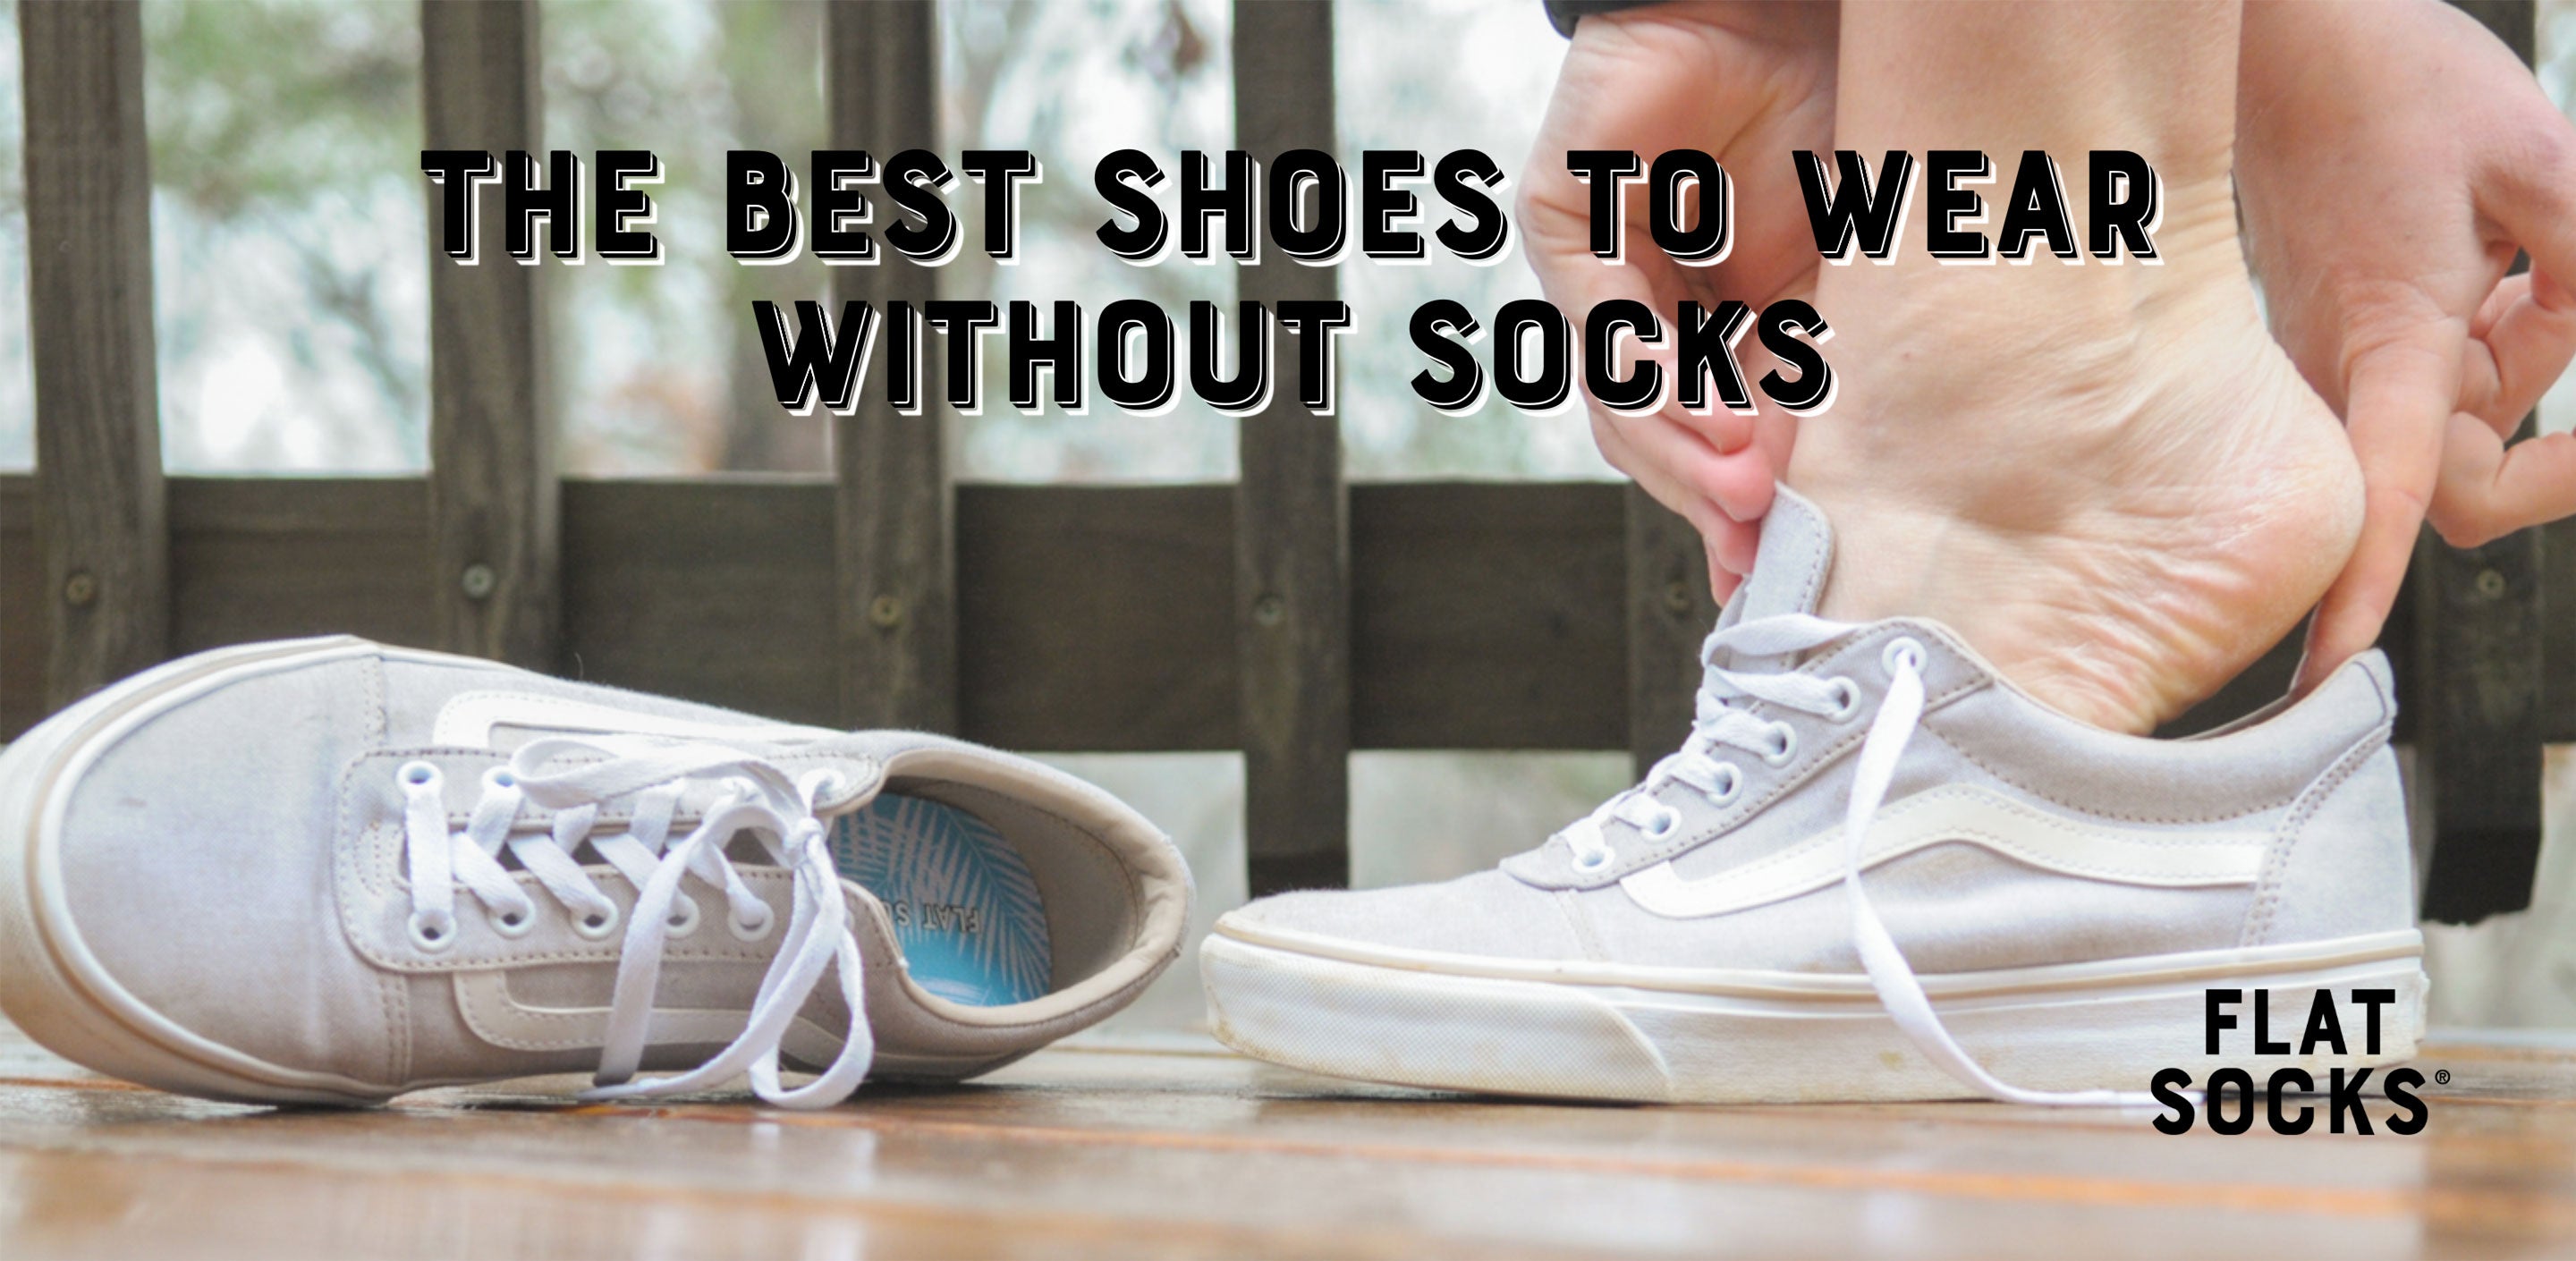 The Best Shoes to Wear Without Socks by FLAT SOCKS